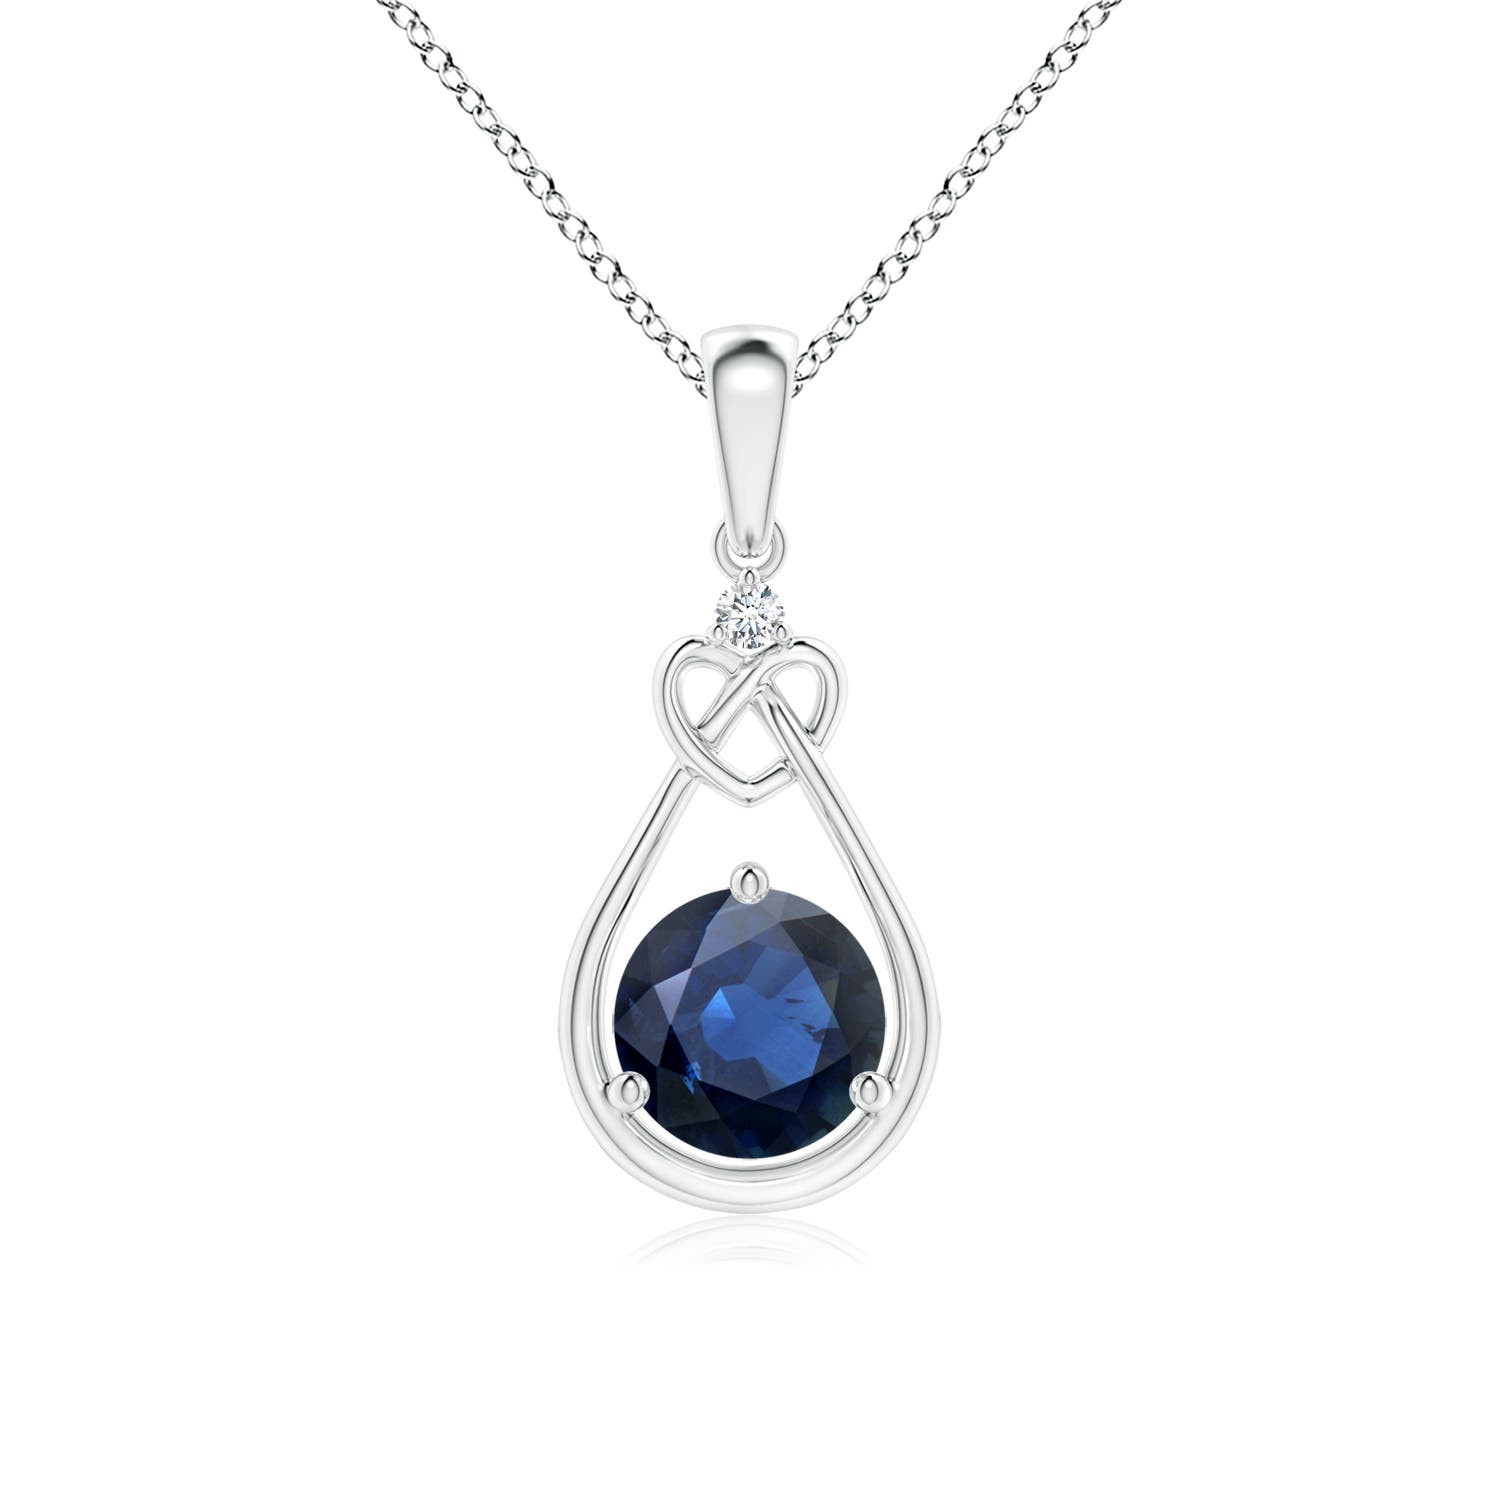 AA - Blue Sapphire / 1.01 CT / 14 KT White Gold